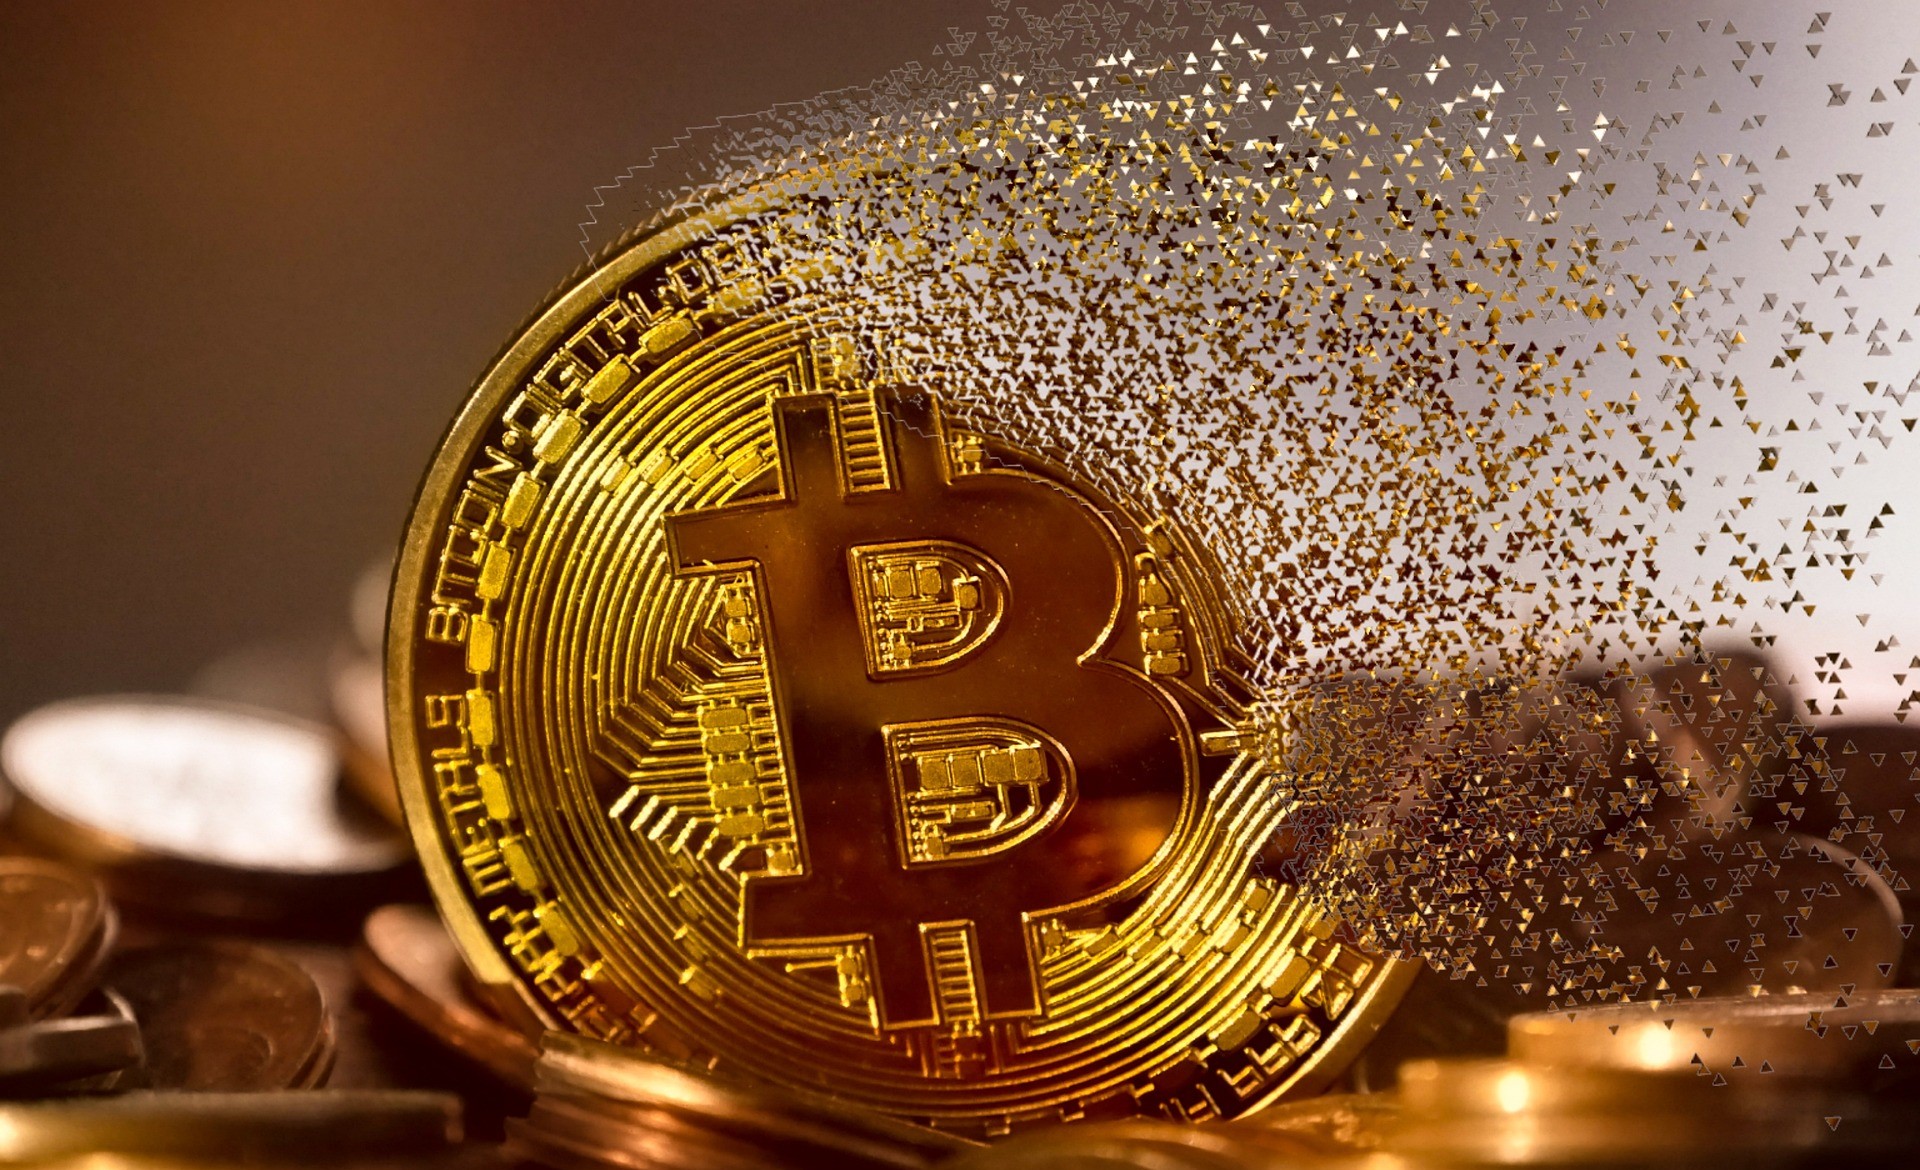 A physical Bitcoin gradually evaporating into pixels